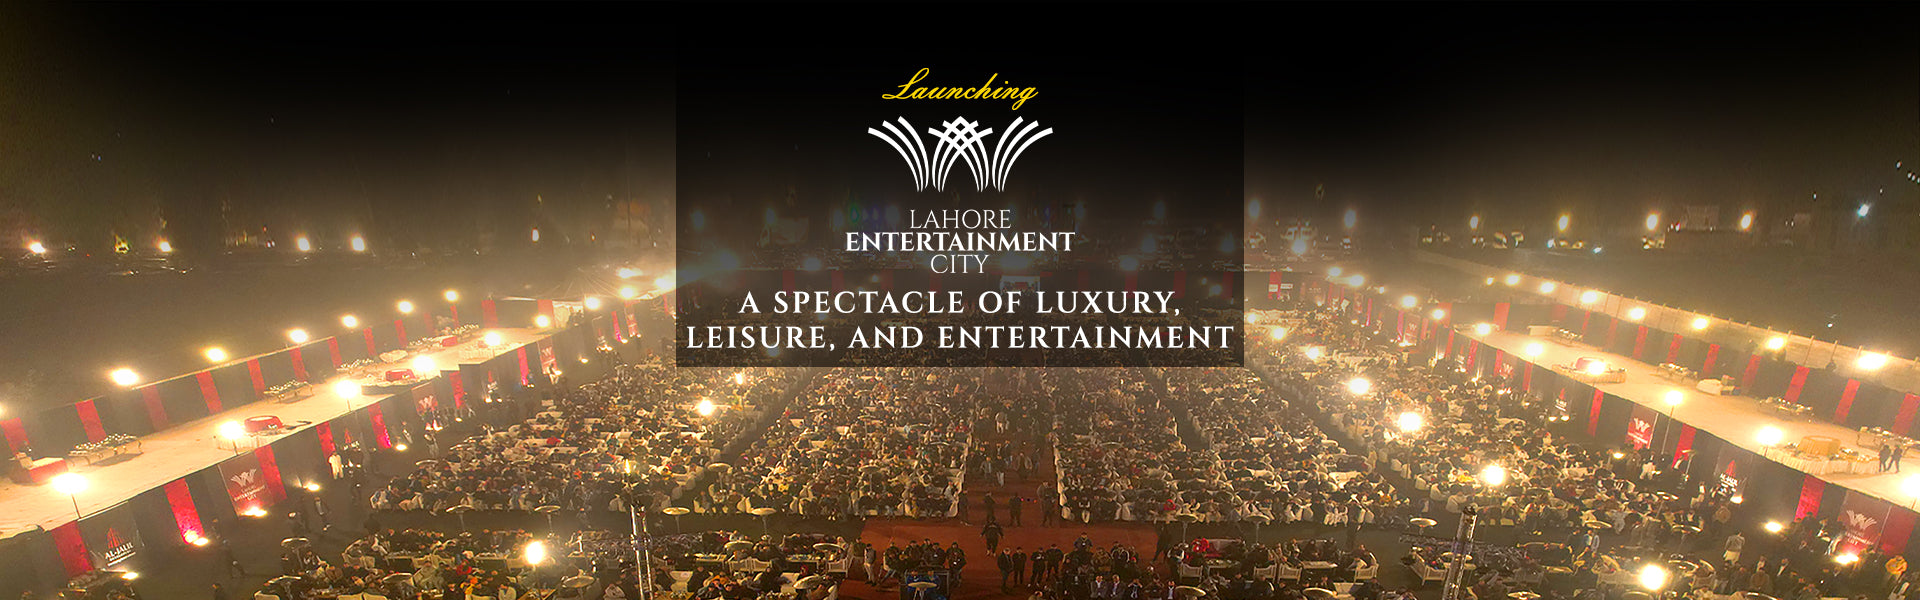 Launching Lahore Entertainment City: An Exhibition of Extravagance, Recreation, and Amusement